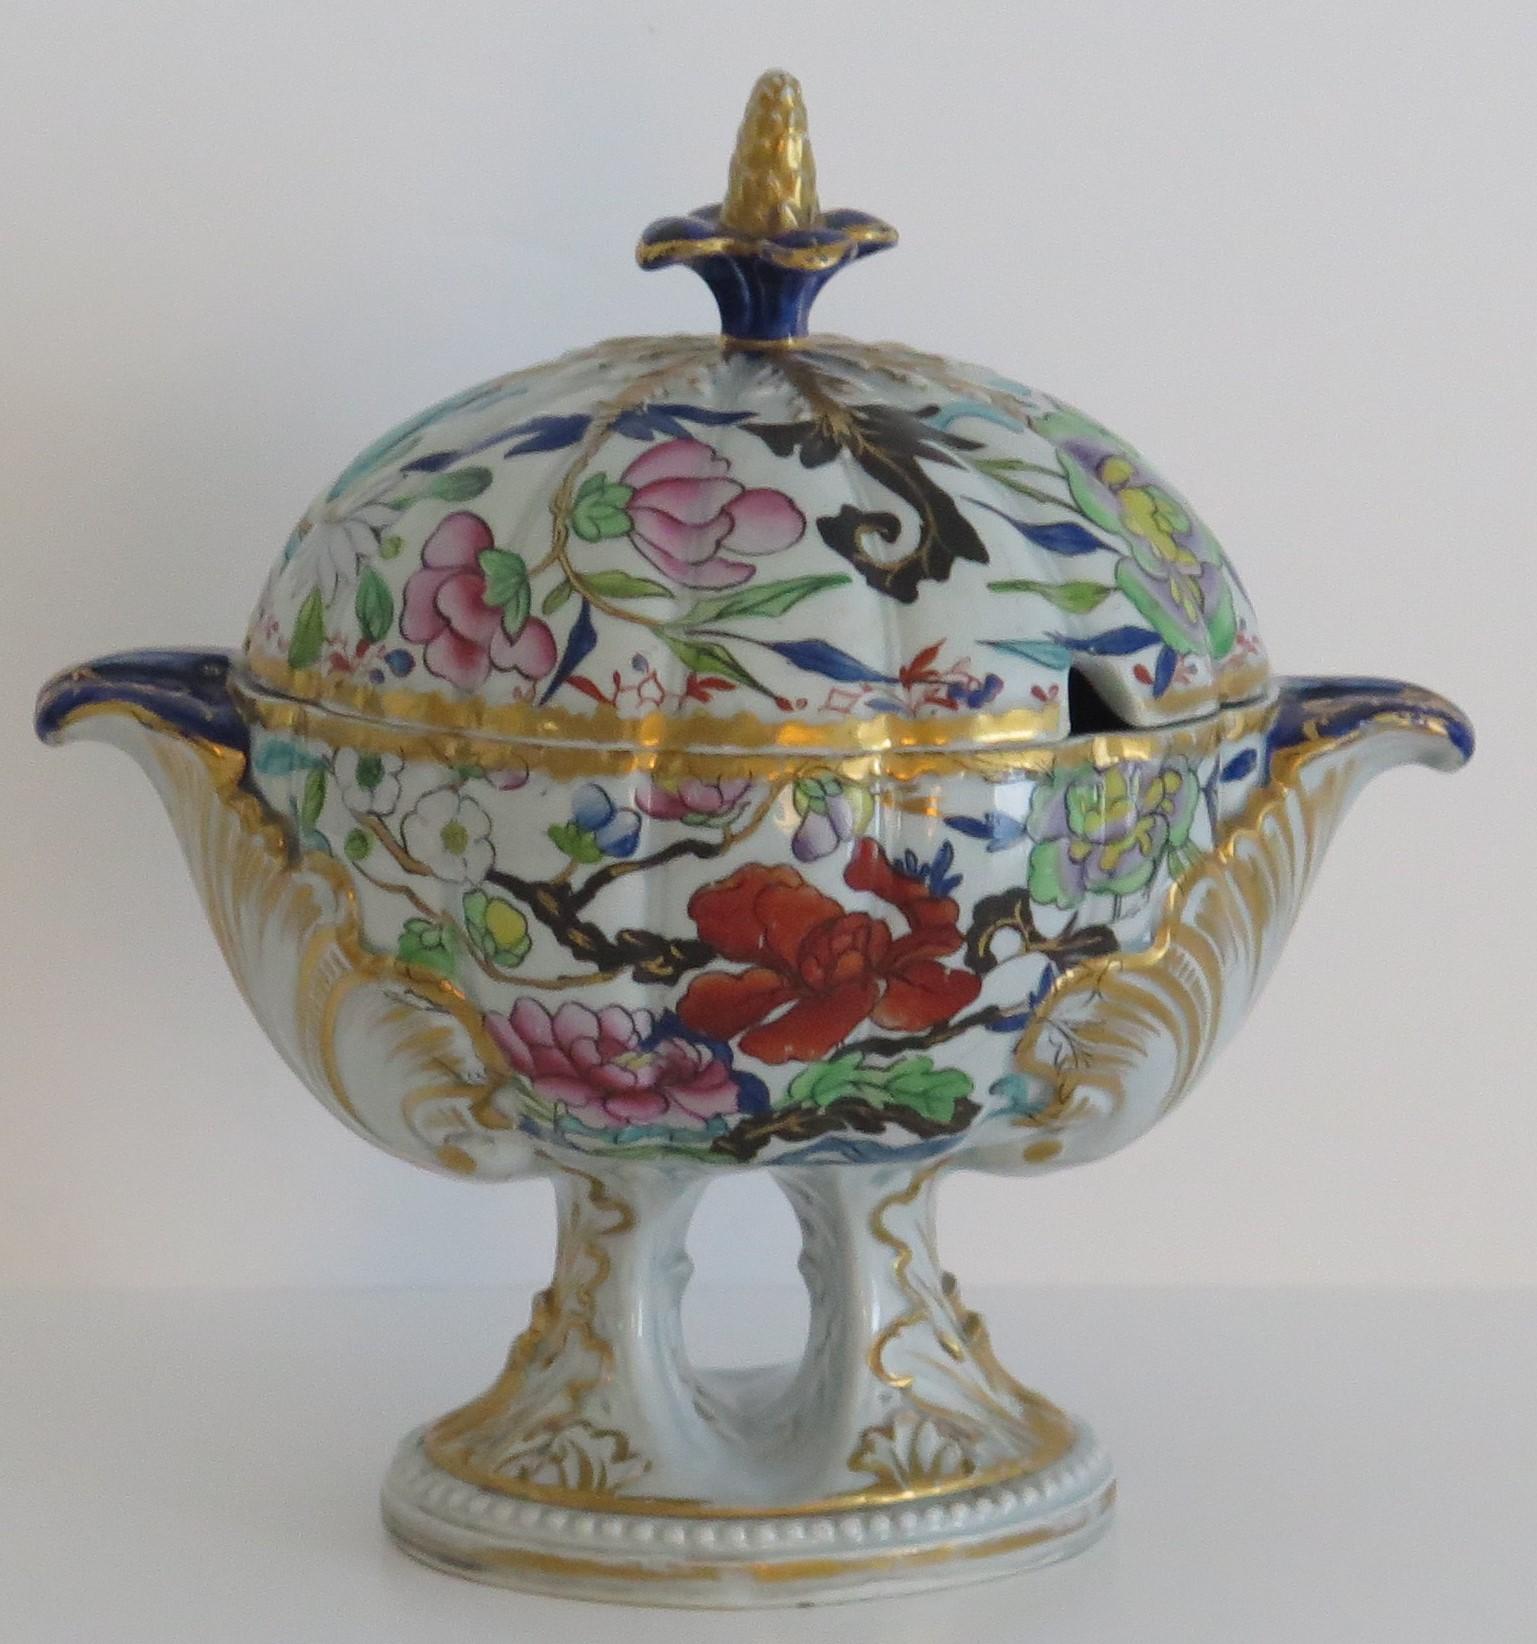 This is a very beautiful Ironstone Desert Tureen, complete with lid , in the Chinese Thorn pattern, made by Mason's of Lane Delph, Staffordshire, England, during the early part of the 19th century, circa 1818.

This pedestal tureen is well potted